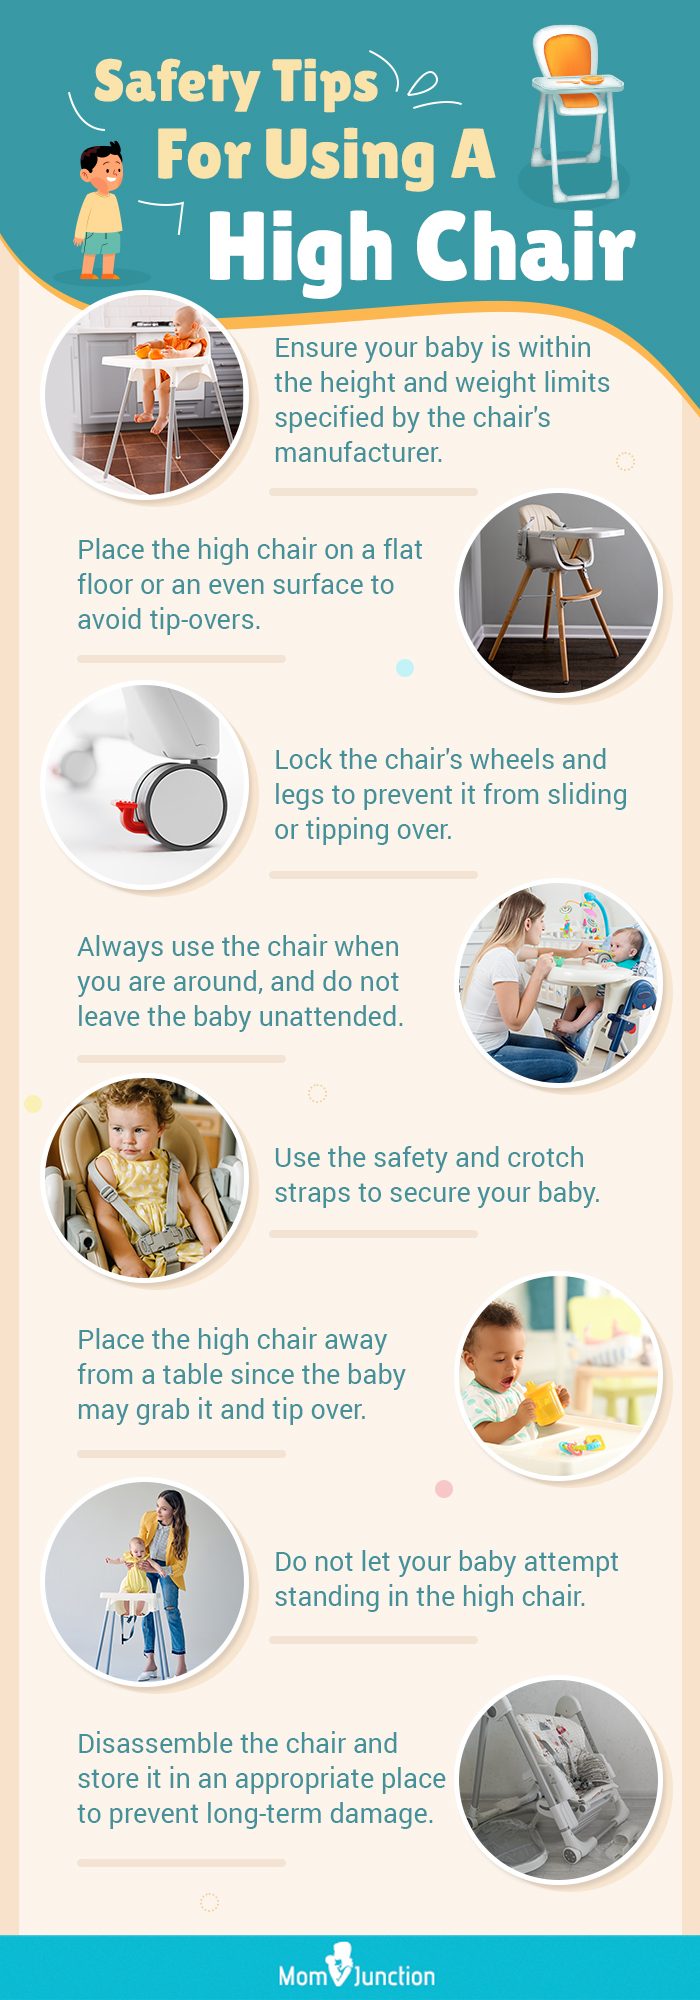 Safety-Tips-For-Using-A-High-Chair (infographic)